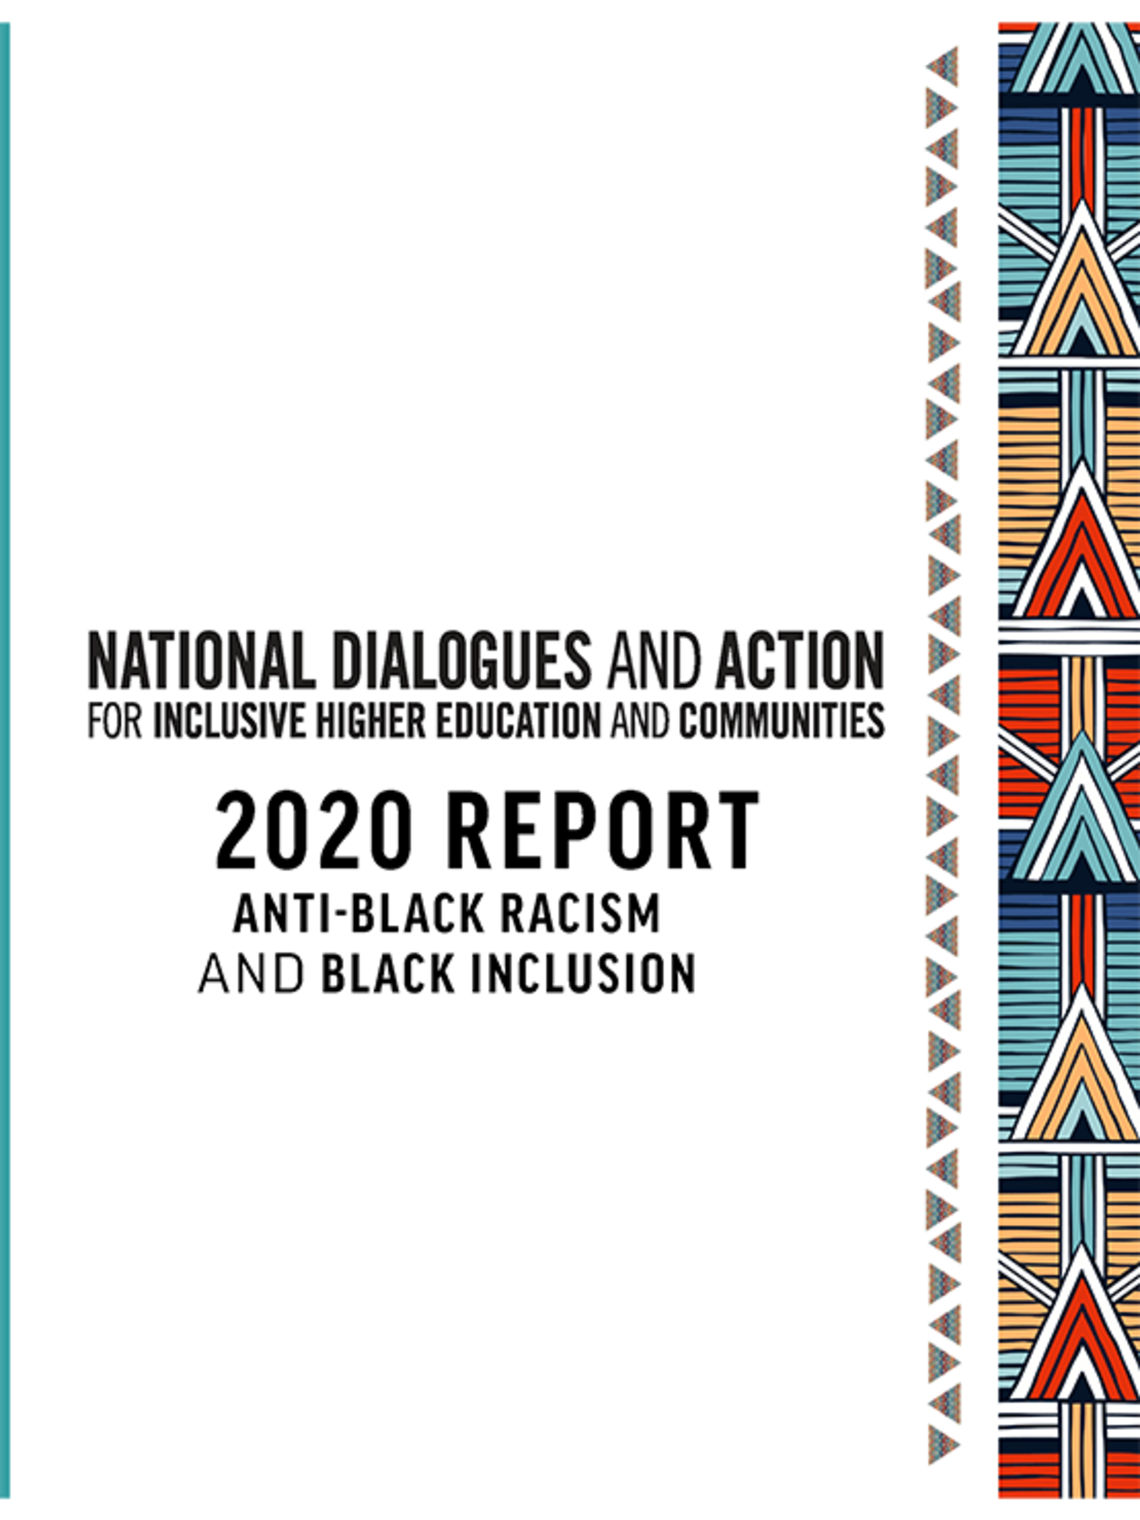 2020 REPORT ANTI-BLACK RACISM AND BLACK INCLUSION